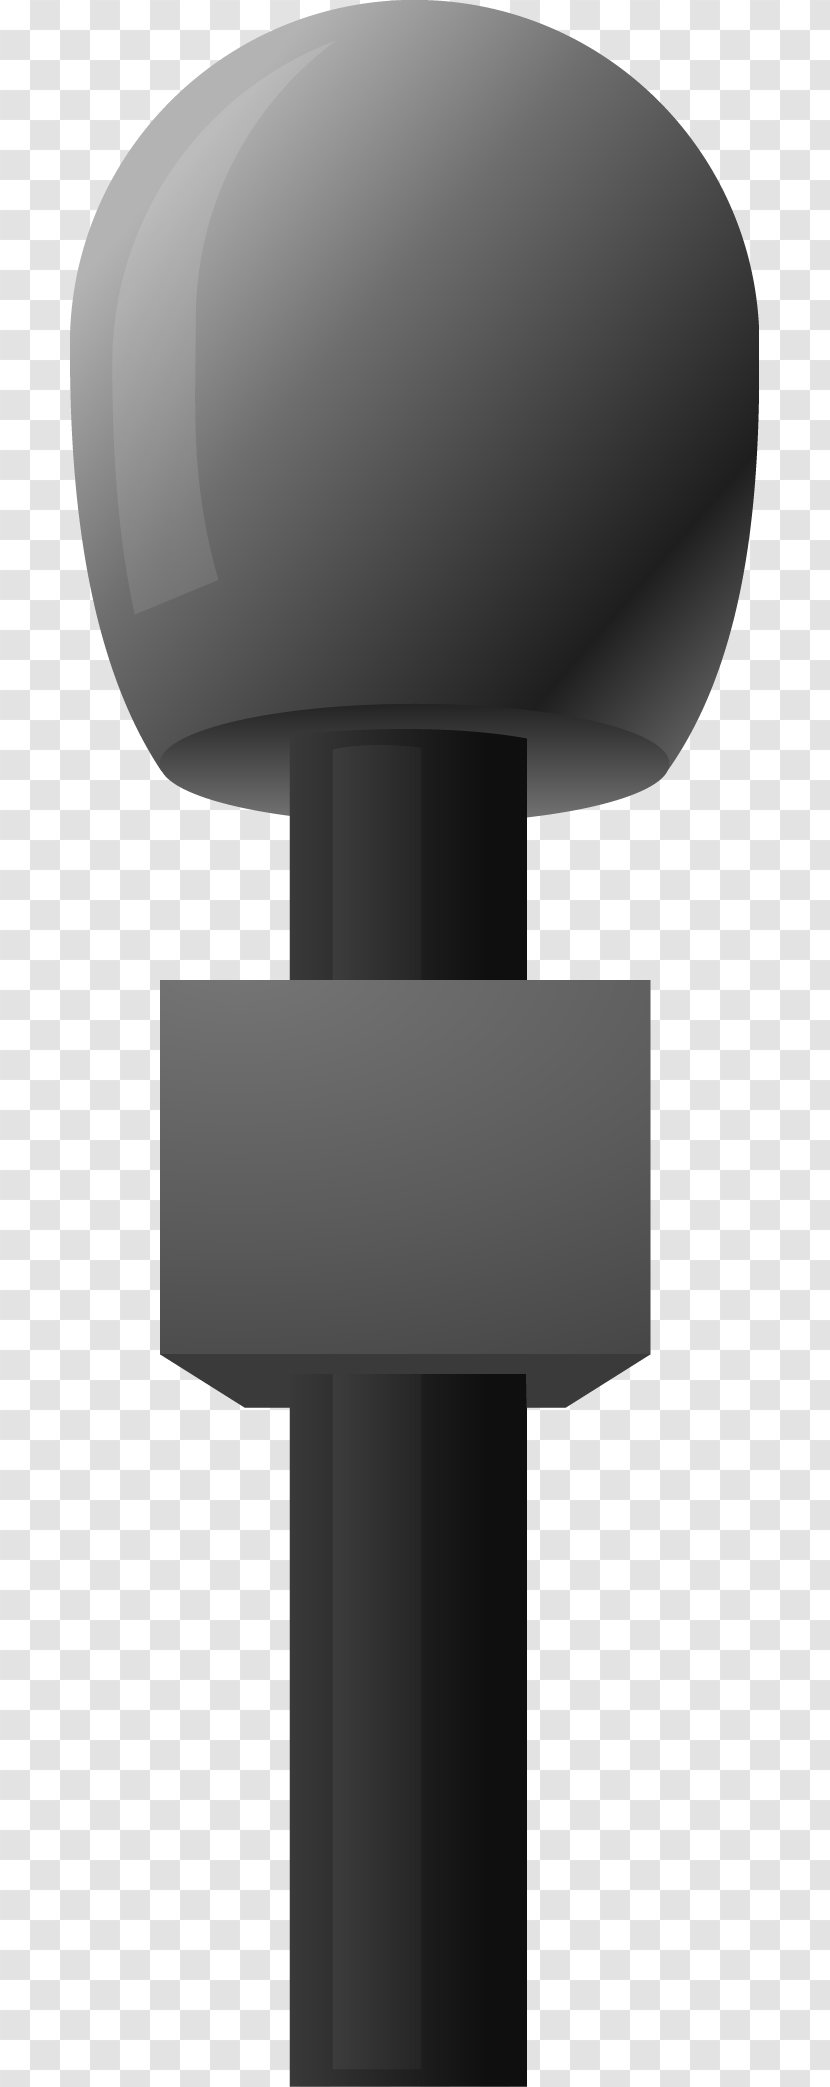 Microphone Download - Silhouette Transparent PNG